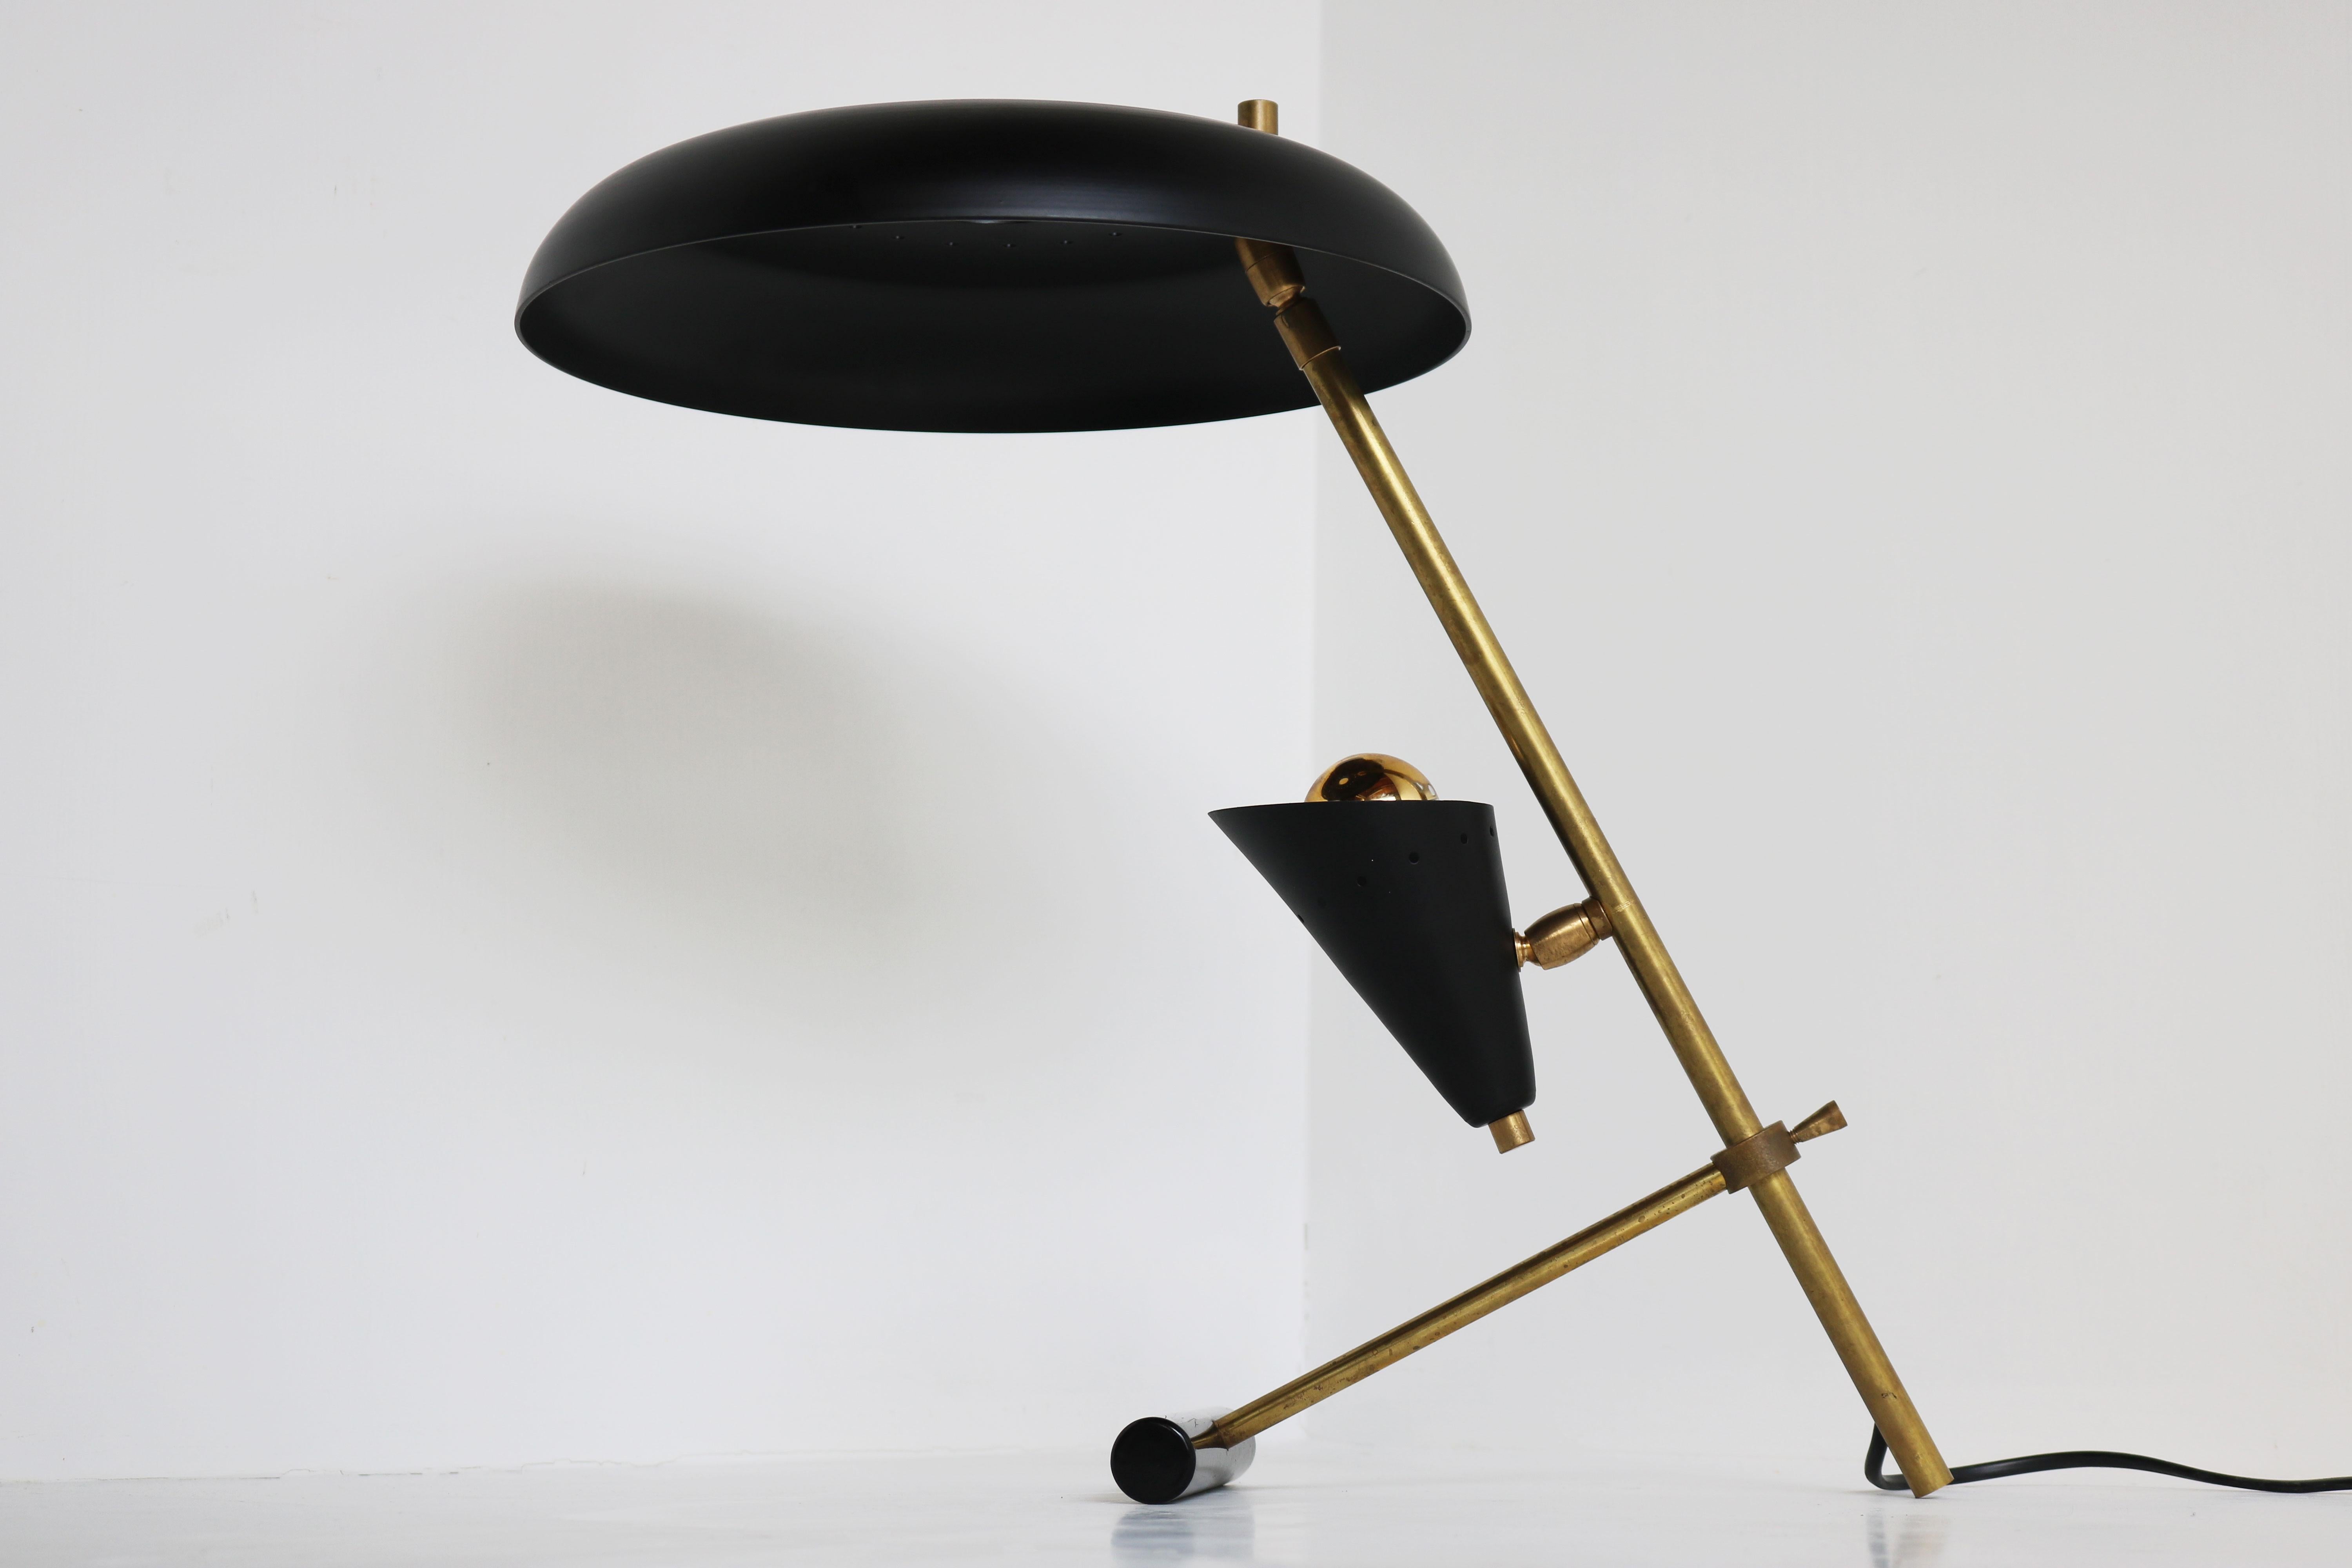 1 of 2 gorgeous Italian vintage design desk / table lamp attributed to Stilnovo. Minimalist design with the well known midcentury ''Z'' design shape. Made out of brass & black metal. You can adjust the shade to your own desired angle new wiring,